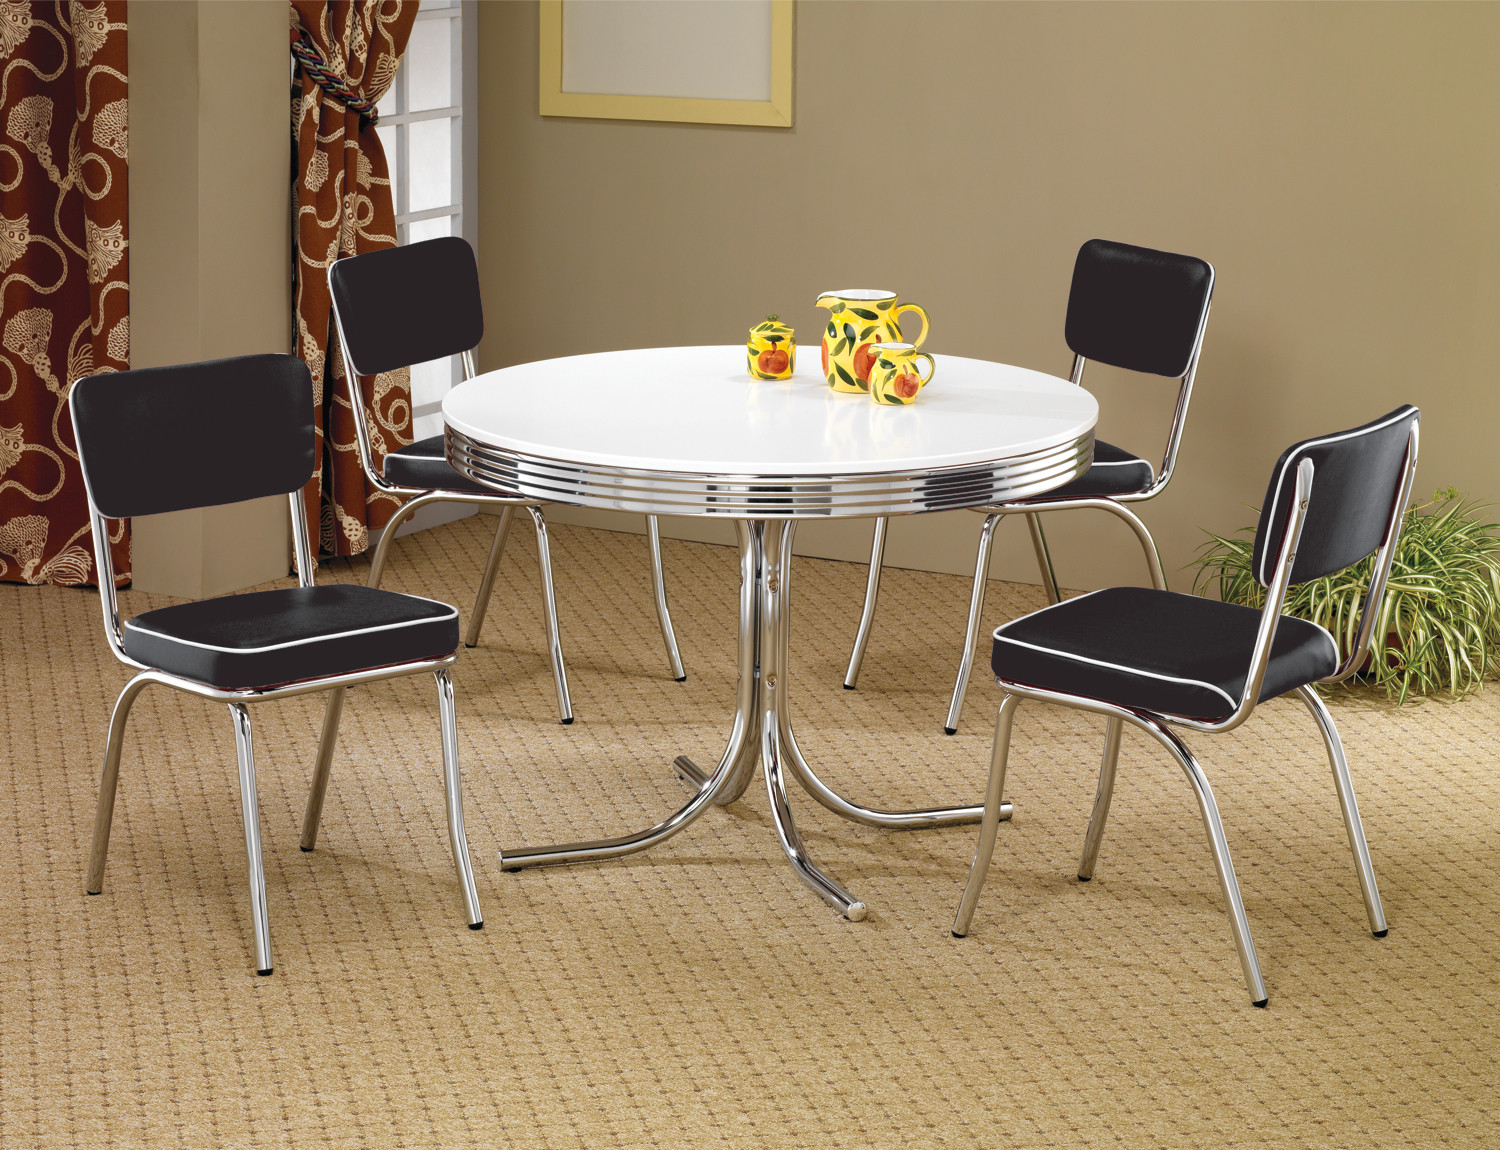 Retro Dining Room Tables And Chairs